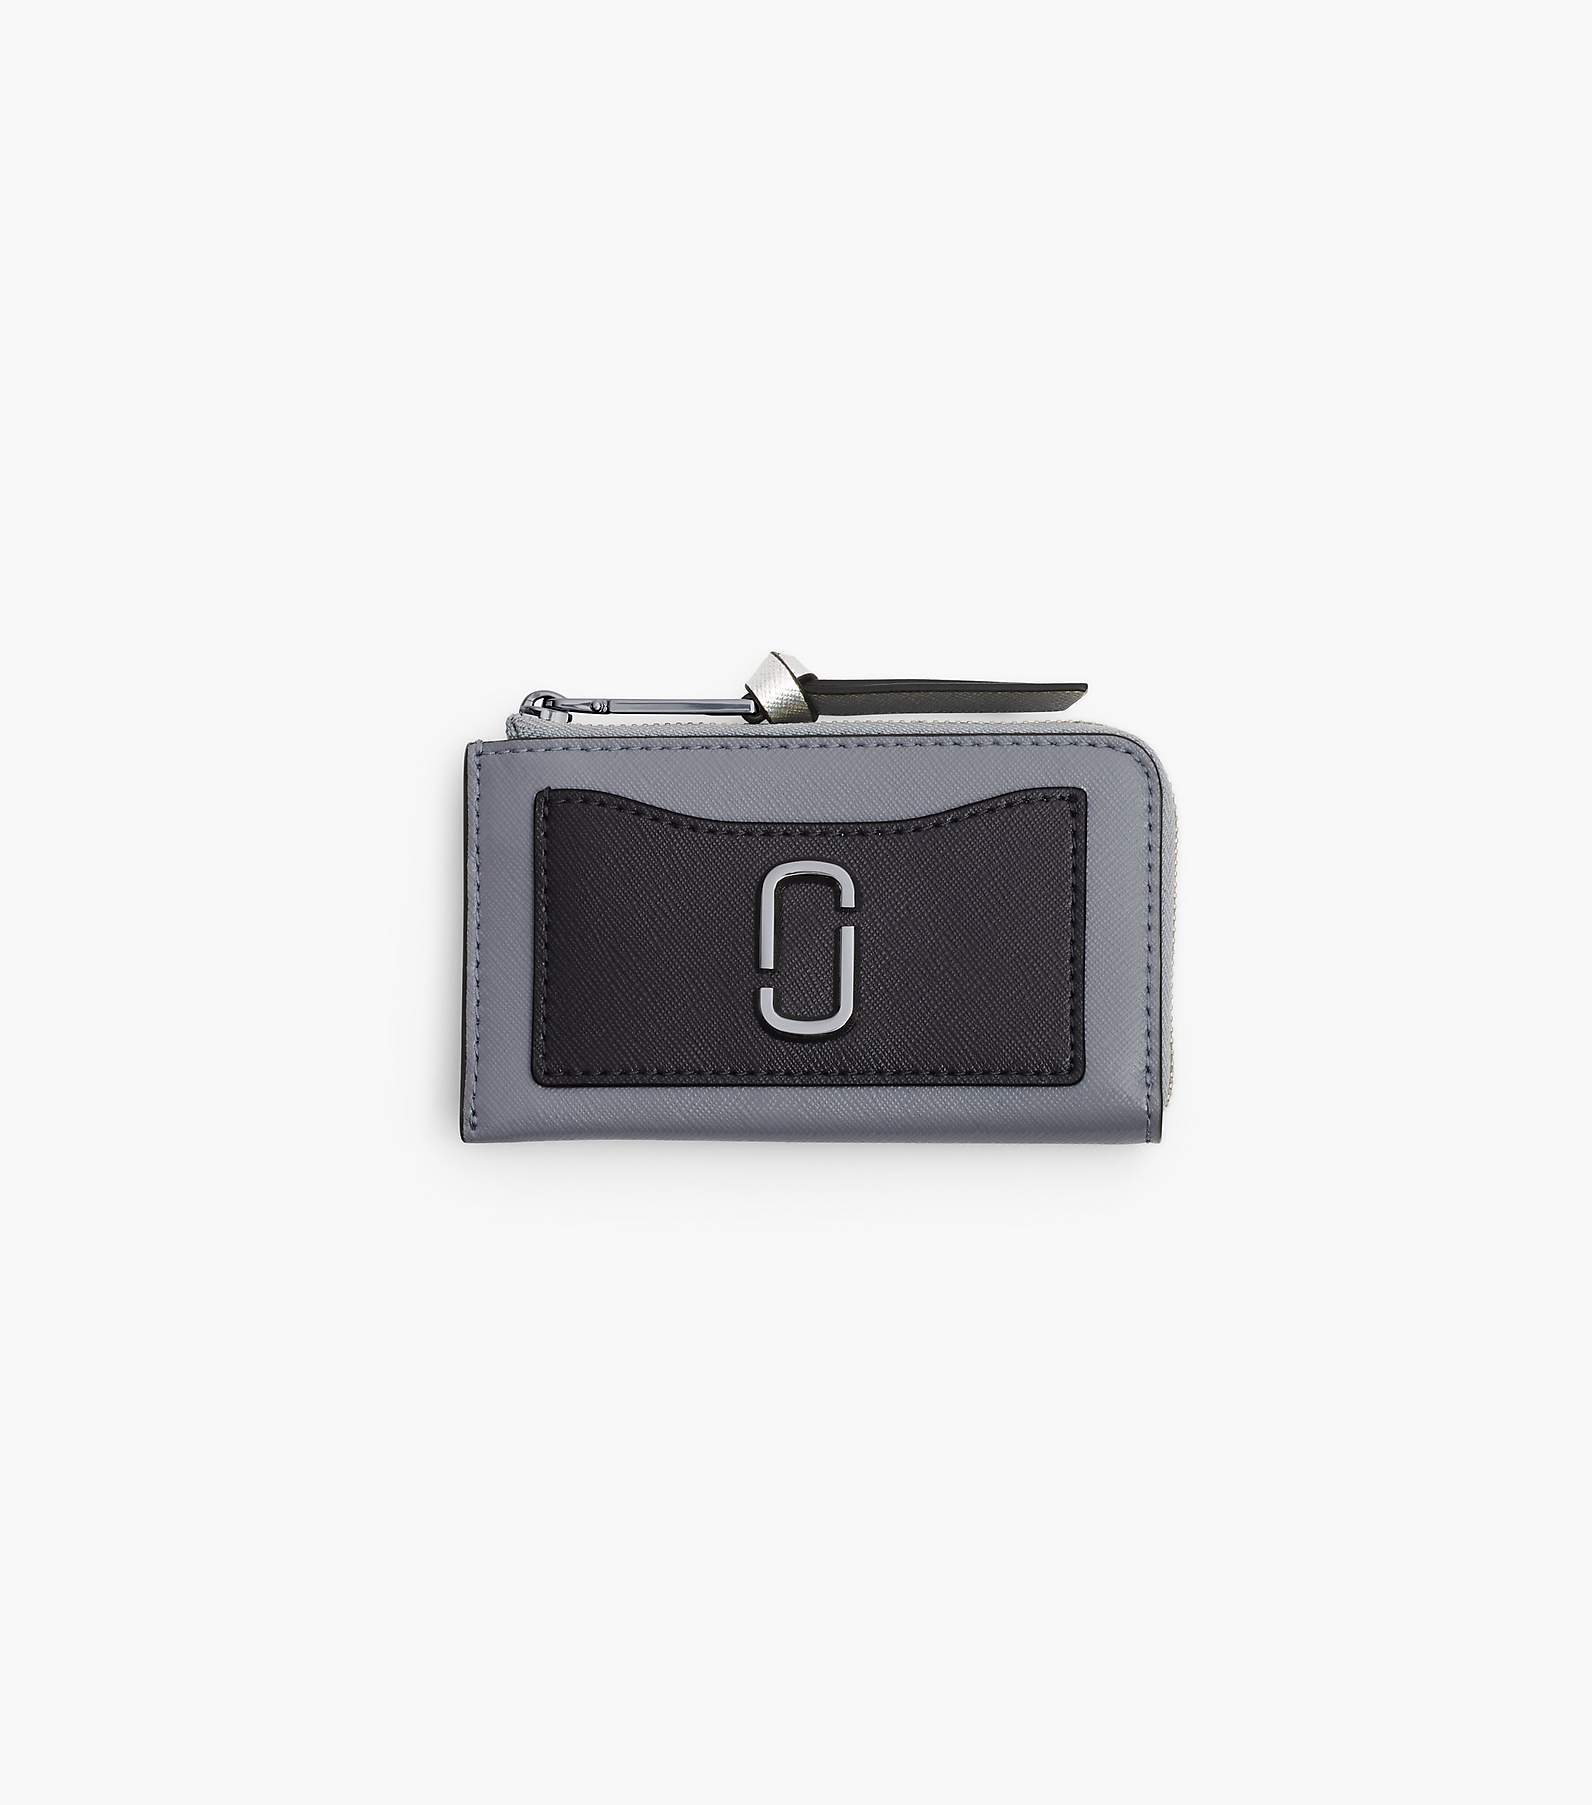 Marc Jacobs Silver 'The Leather Top Zip Wristlet' Wallet